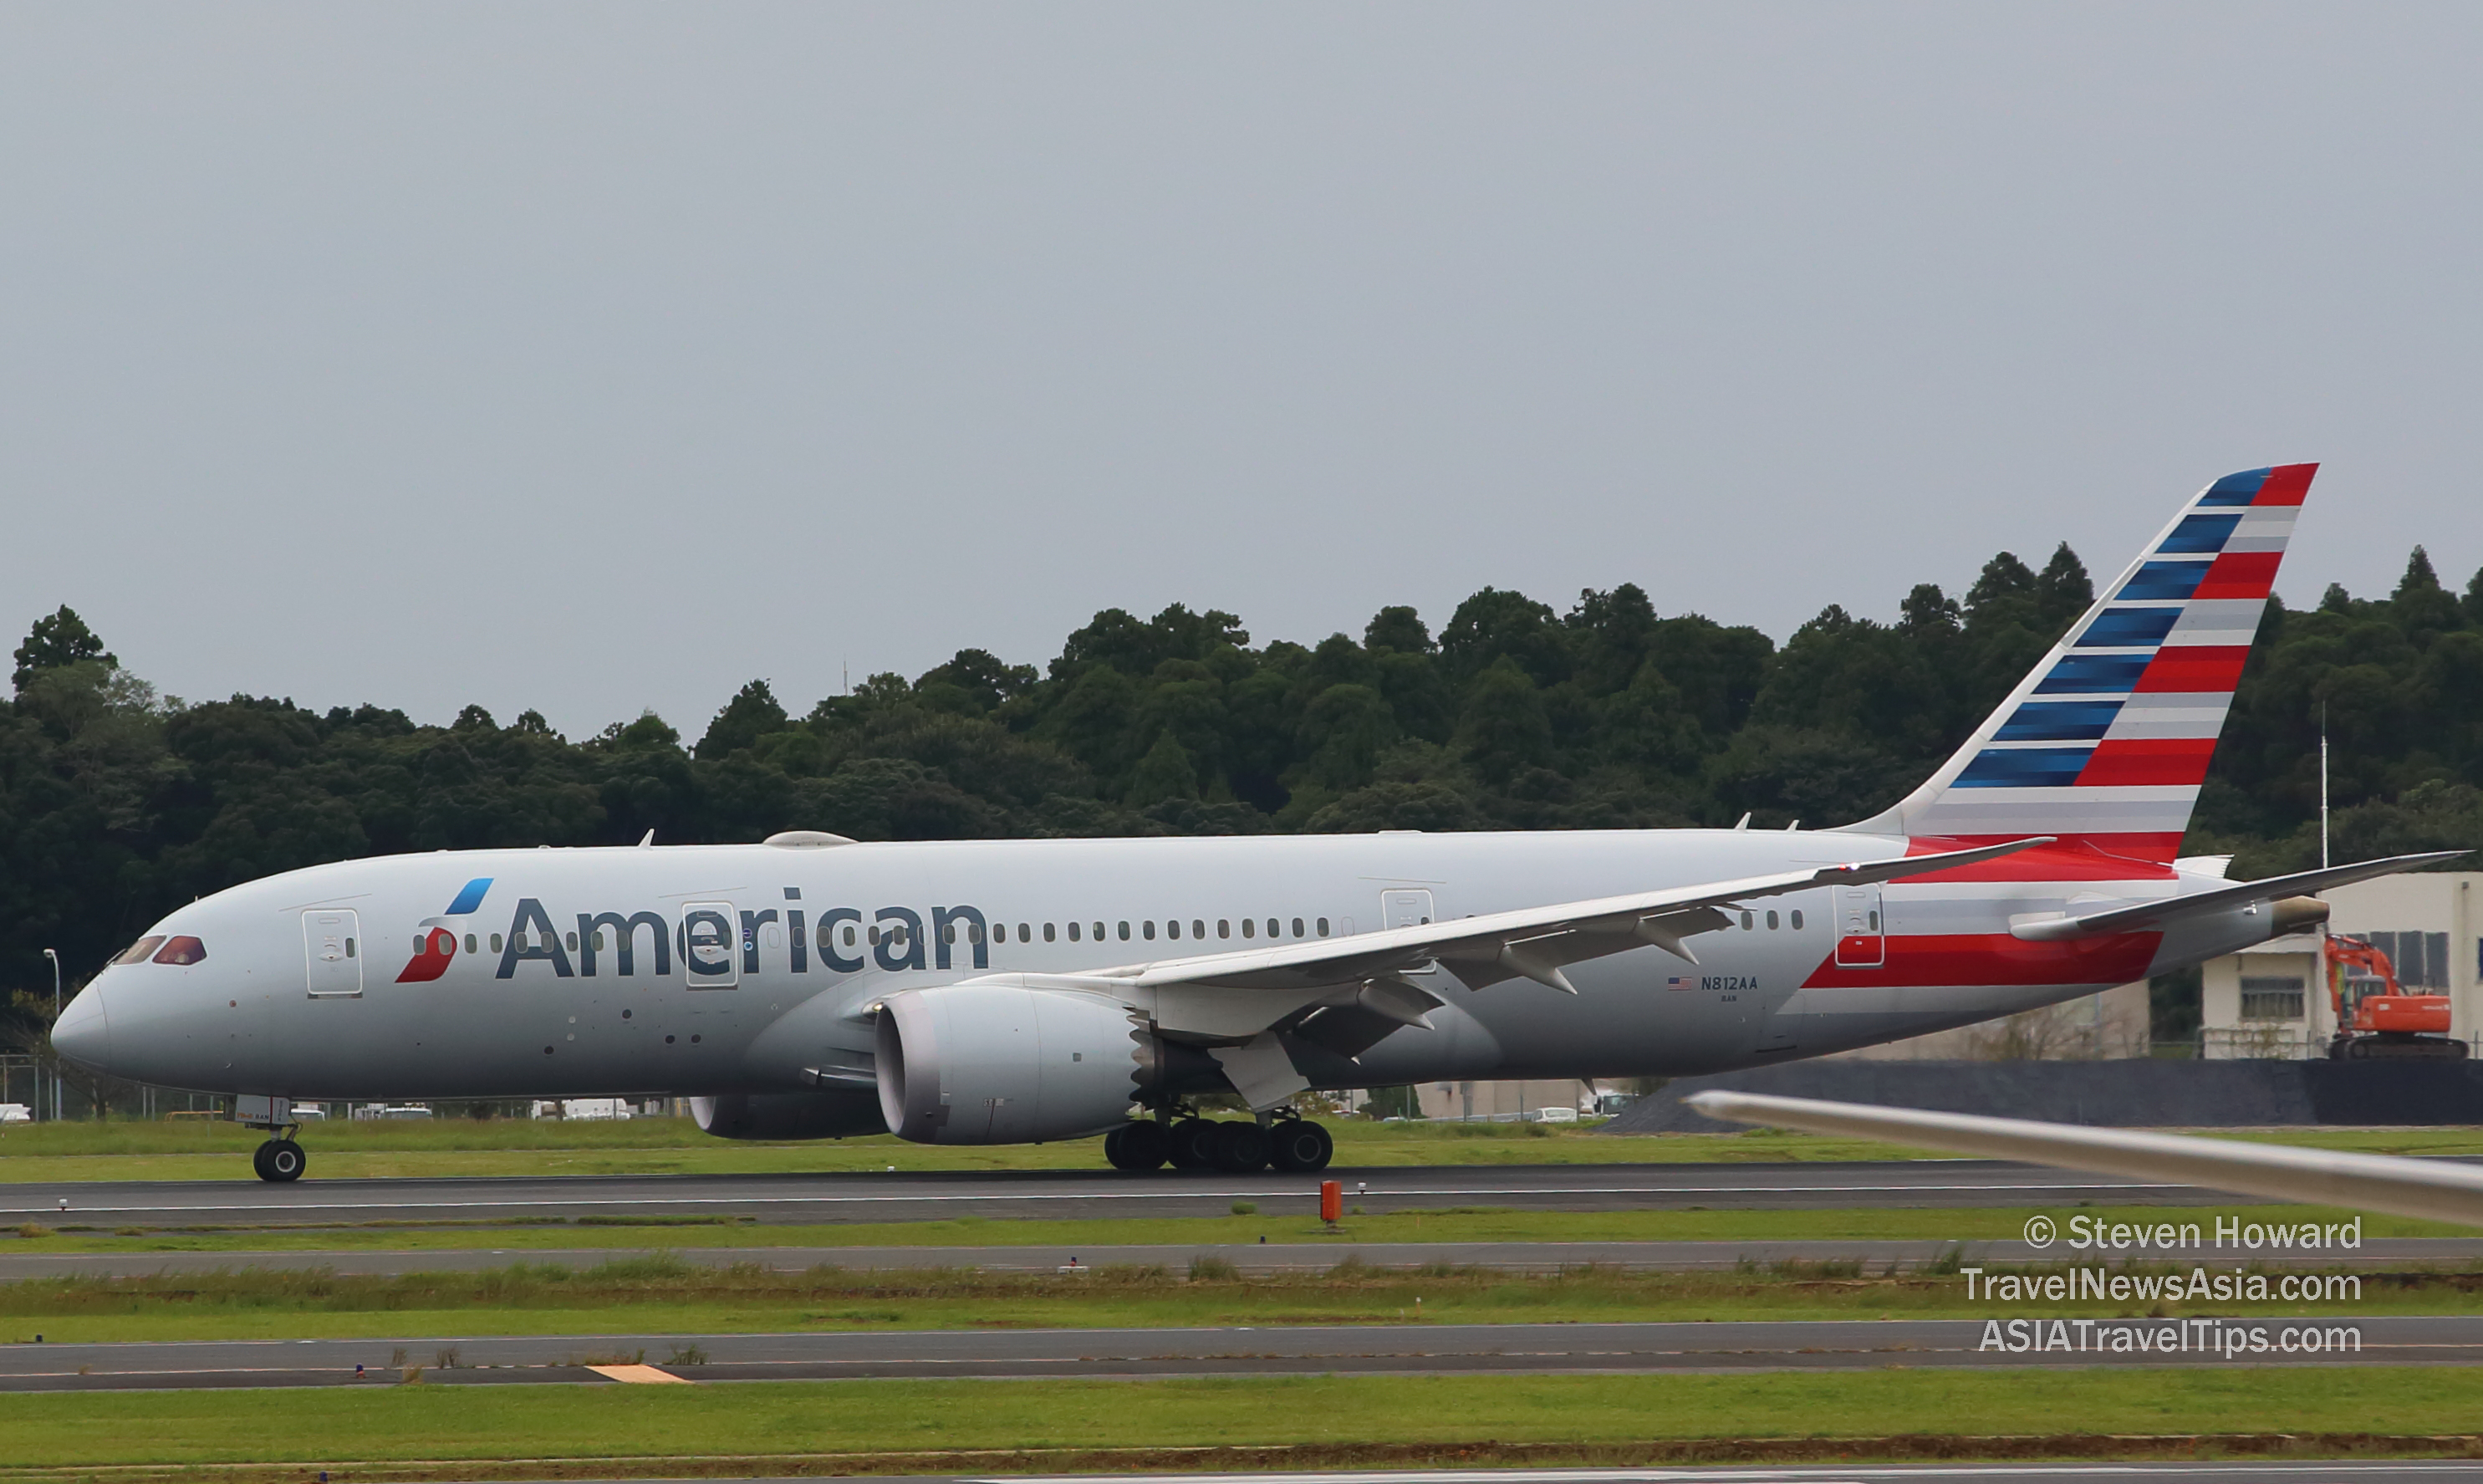 American Airlines Boeing 787-8 reg: N812AA. Picture by Steven Howard of TravelNewsAsia.com Click to enlarge.